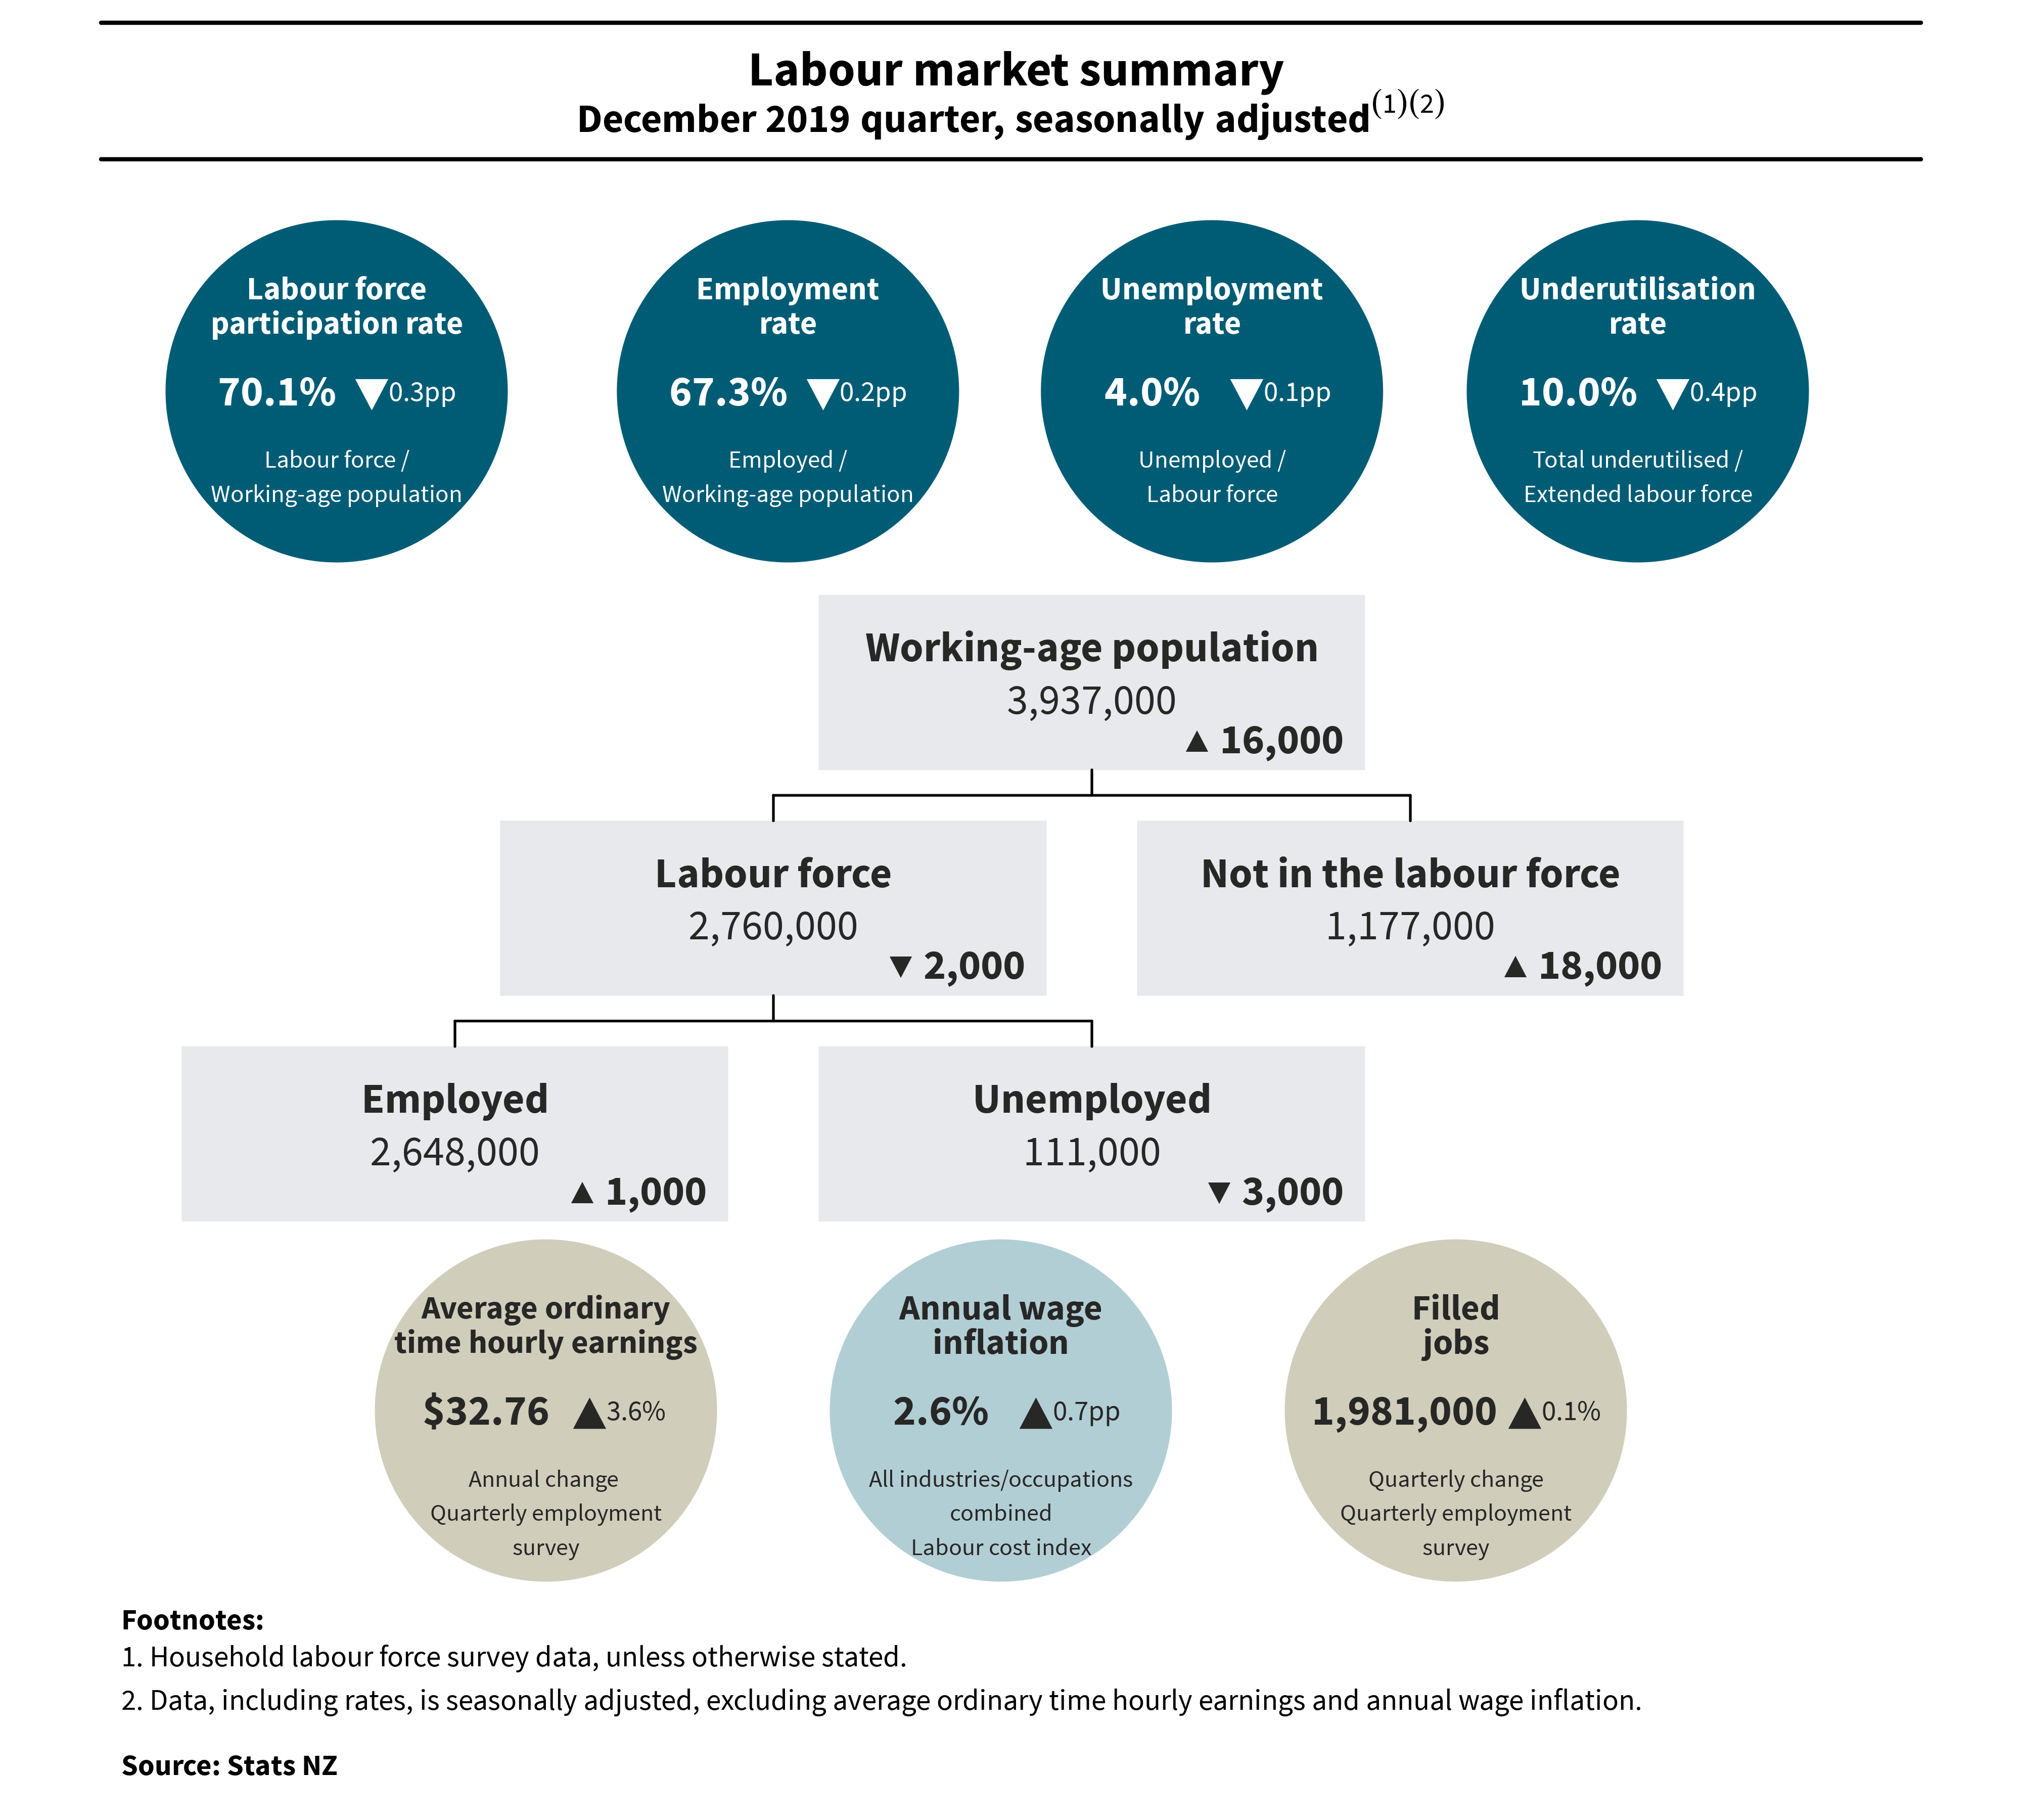 Diagram shows data from December 2019 quarter's household labour force survey (HLFS), quarterly employment survey (QES), and labour cost index (LCI). See full text alternative below.